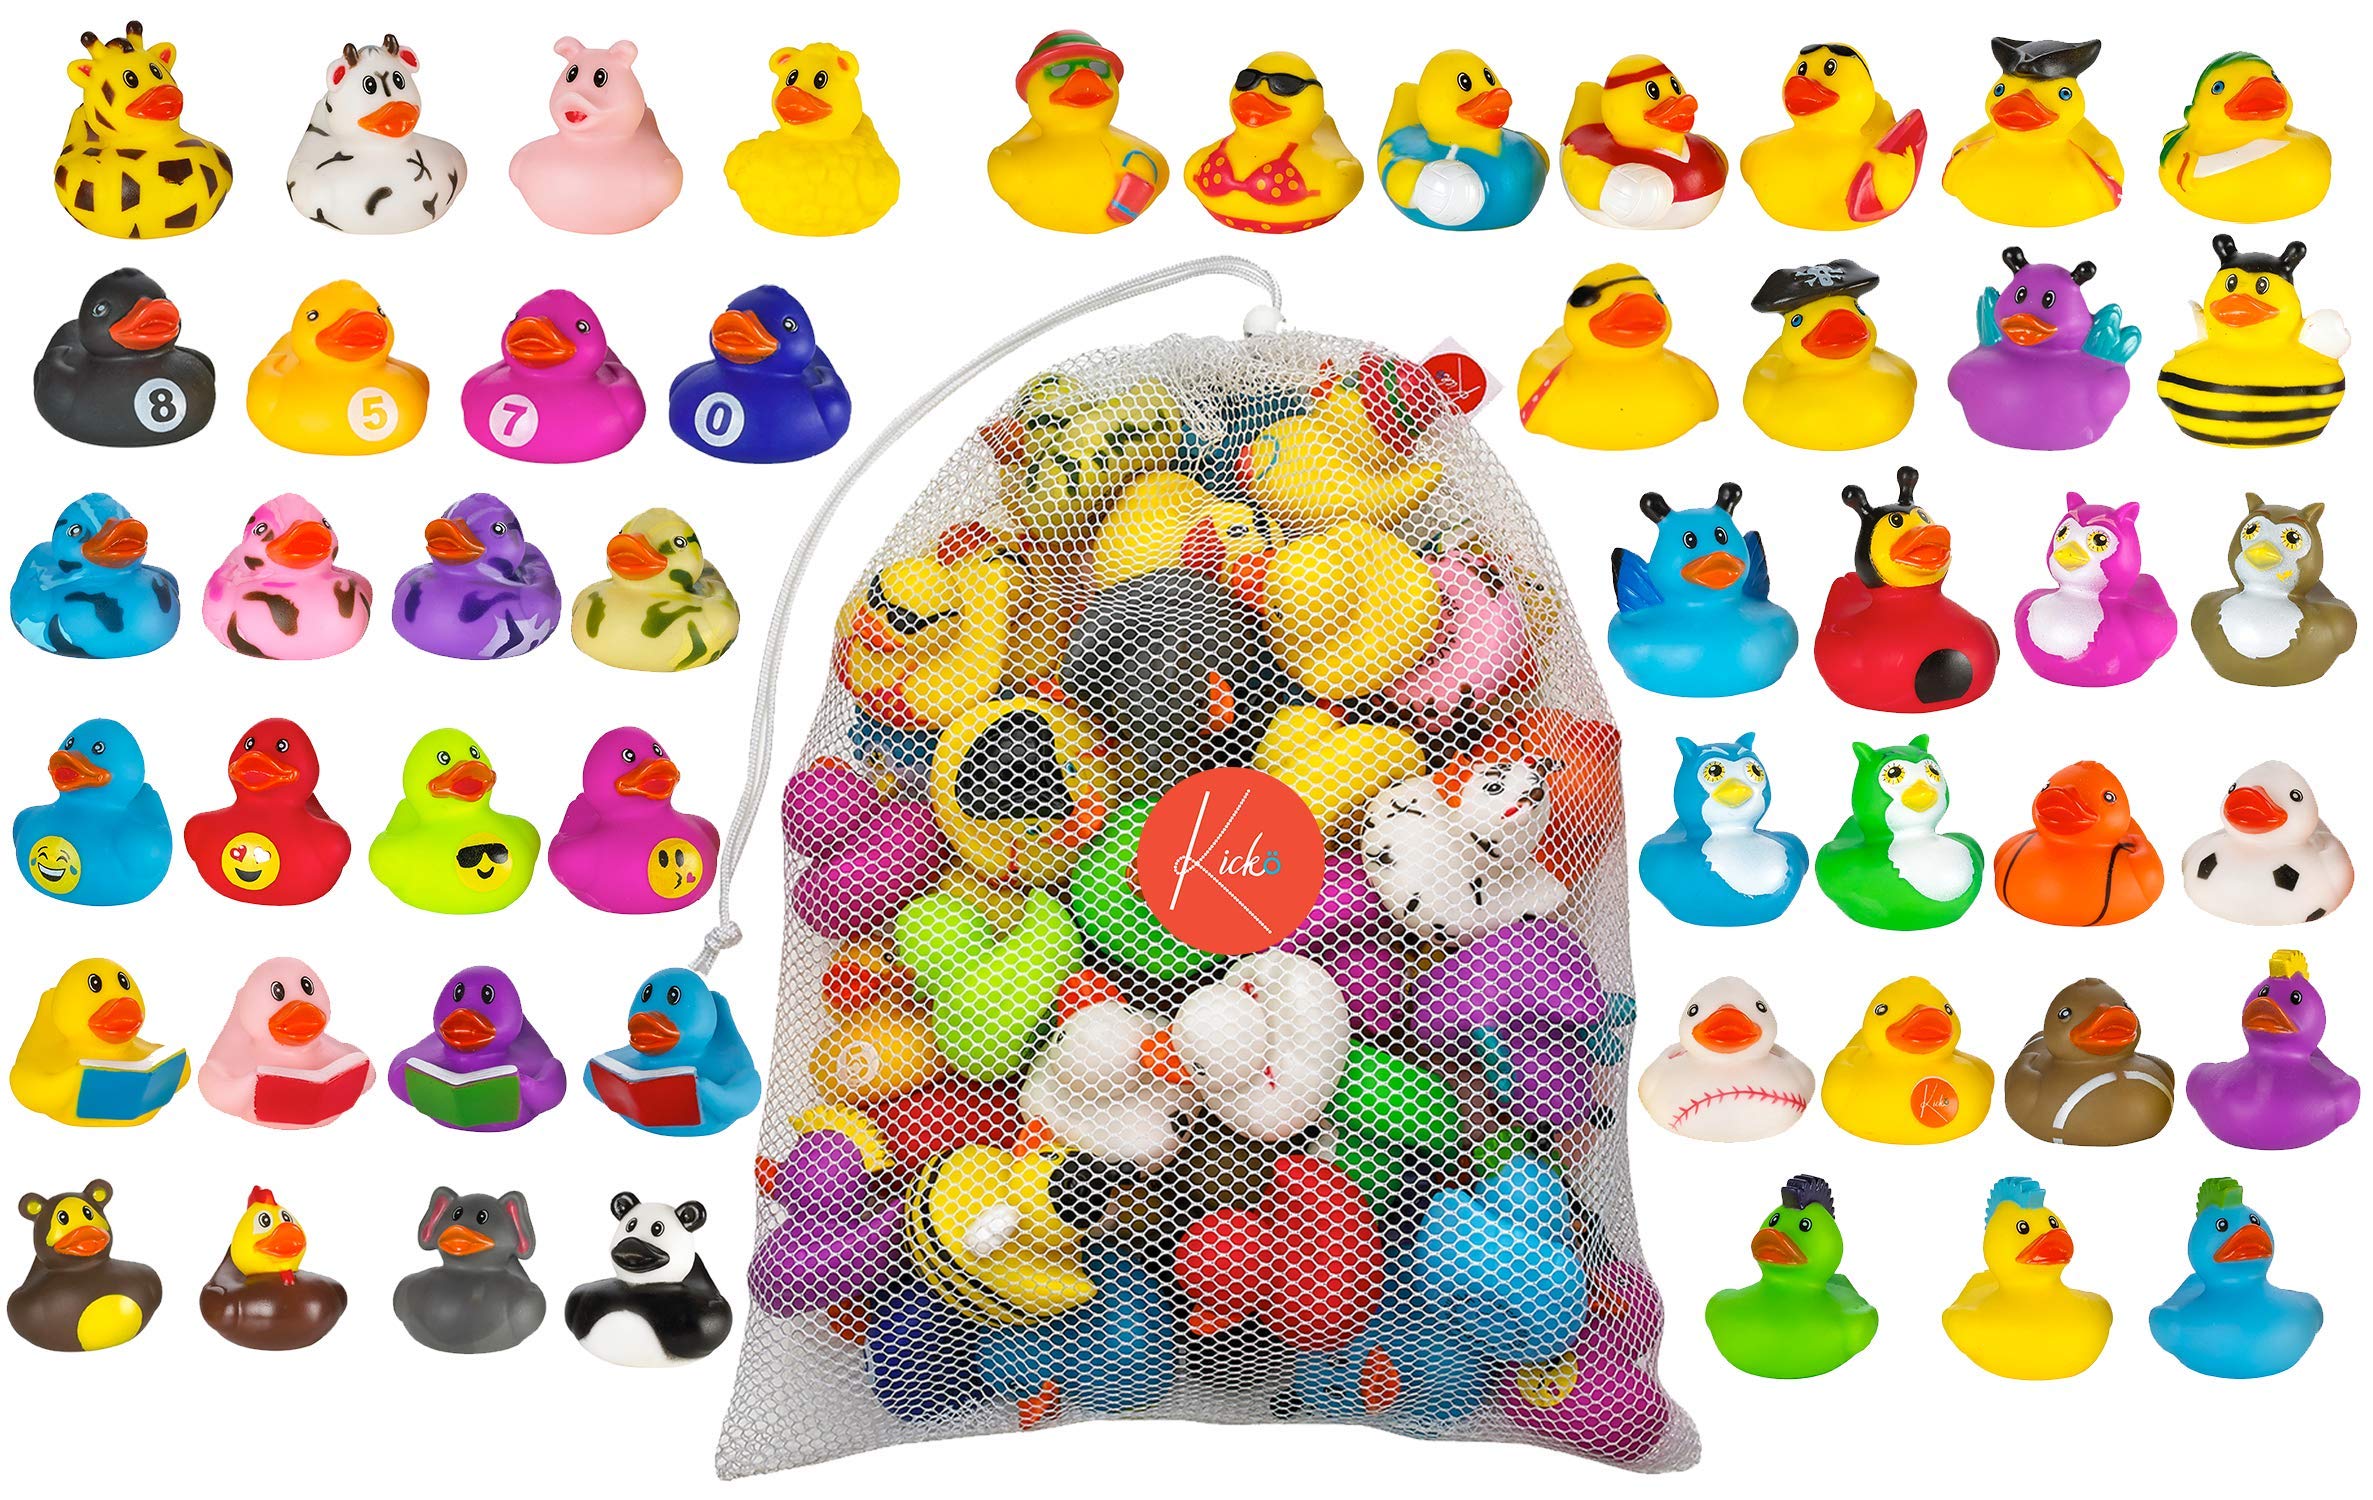 Kicko Assorted Rubber Ducks - 50 Pack - 2 Inches - for Kids, Sensory Play, Stress Relief, Novelty, Stocking Stuffers, Classroom Prizes, Decorations, Supplies, Holidays, Pinata Filler, and Rewards